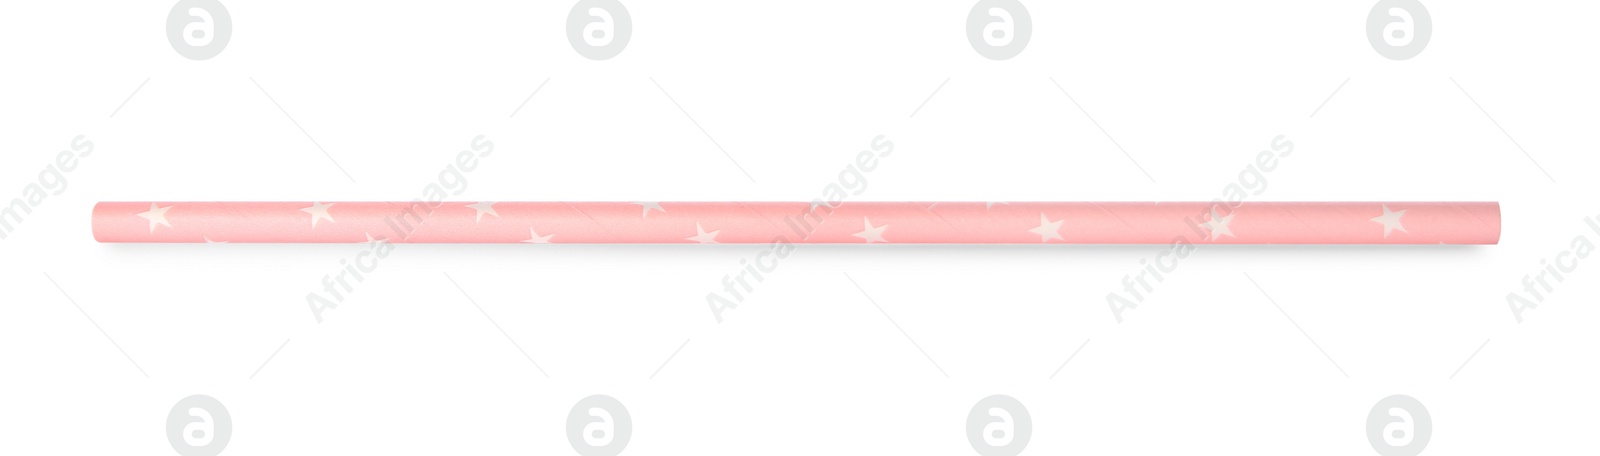 Photo of One paper straw with stars for drinking isolated on white